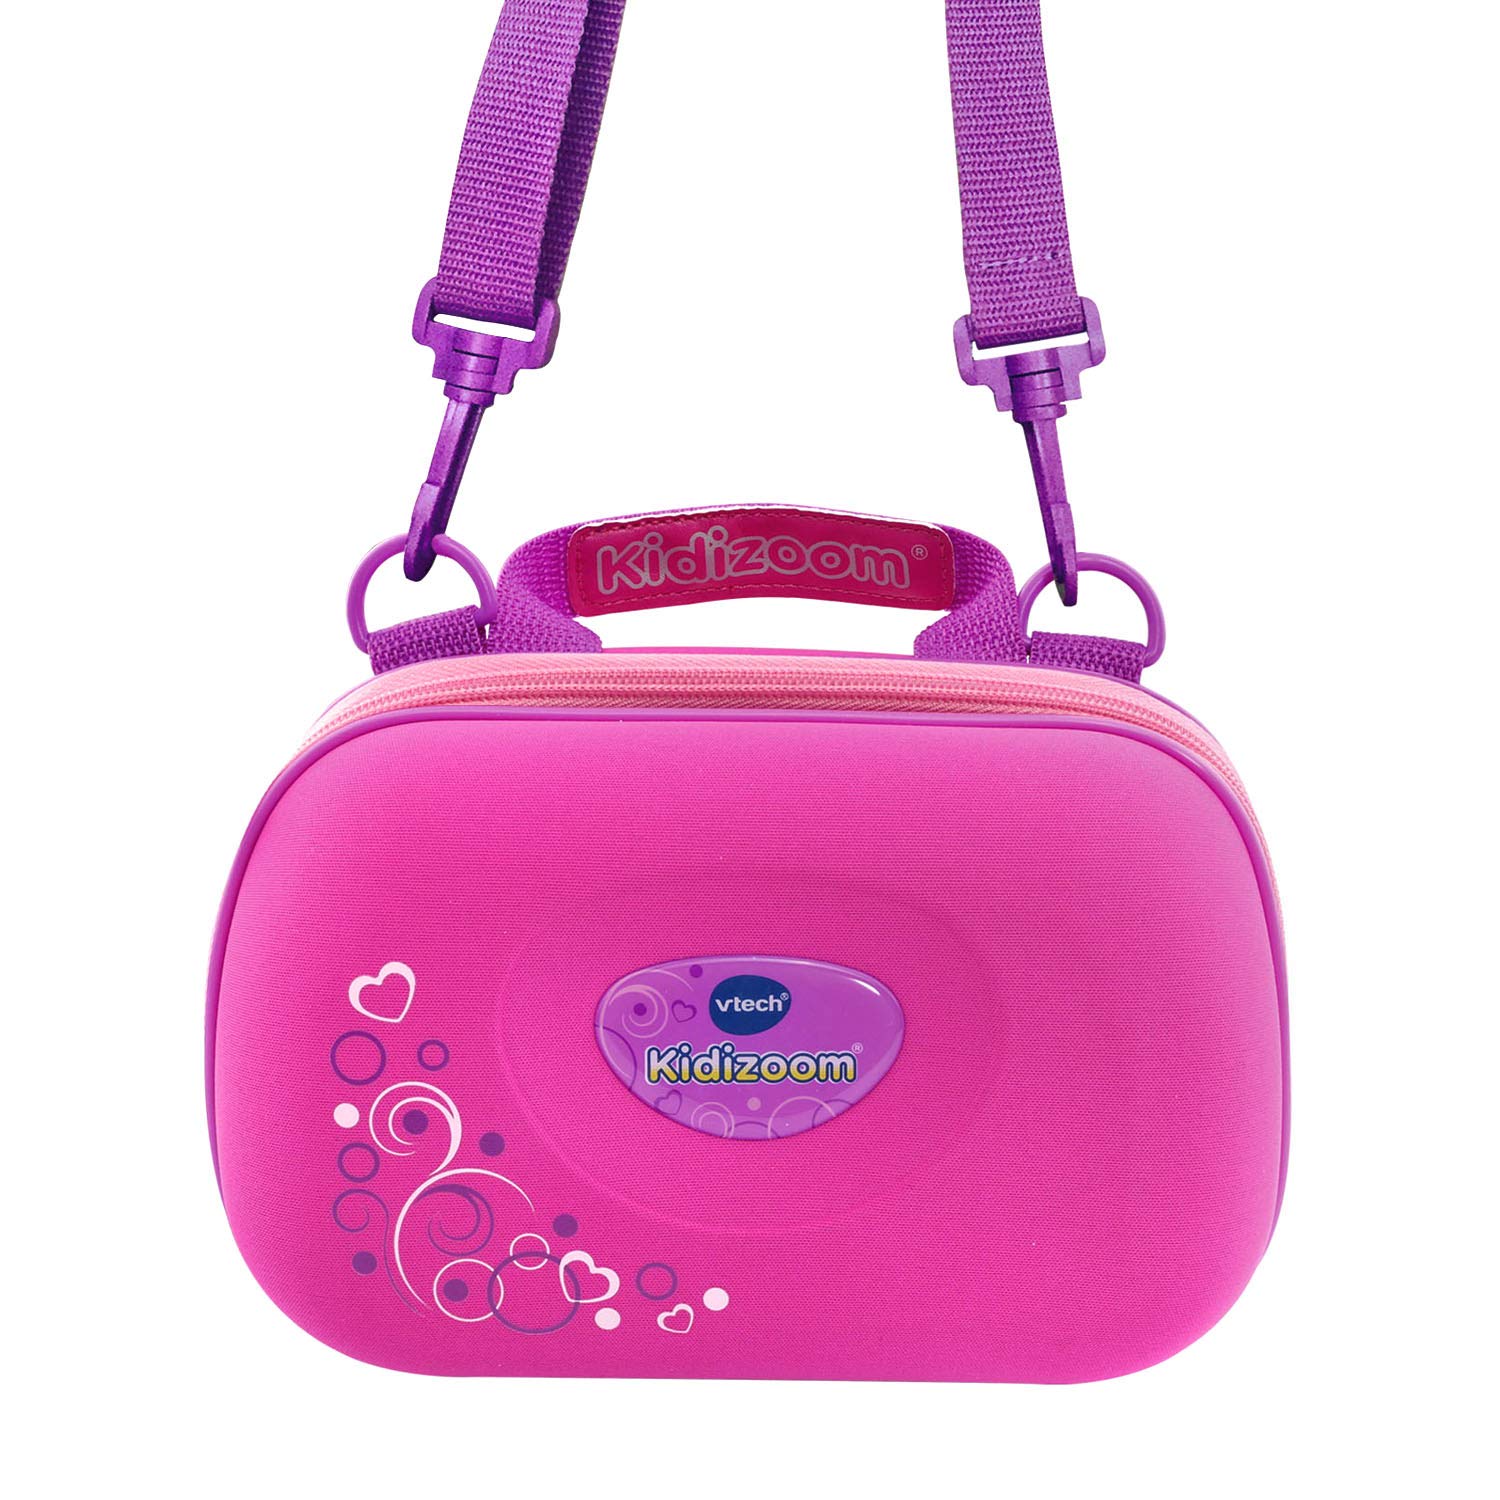 VTech Kidizoom Carrying Case Amazon Exclusive, Pink